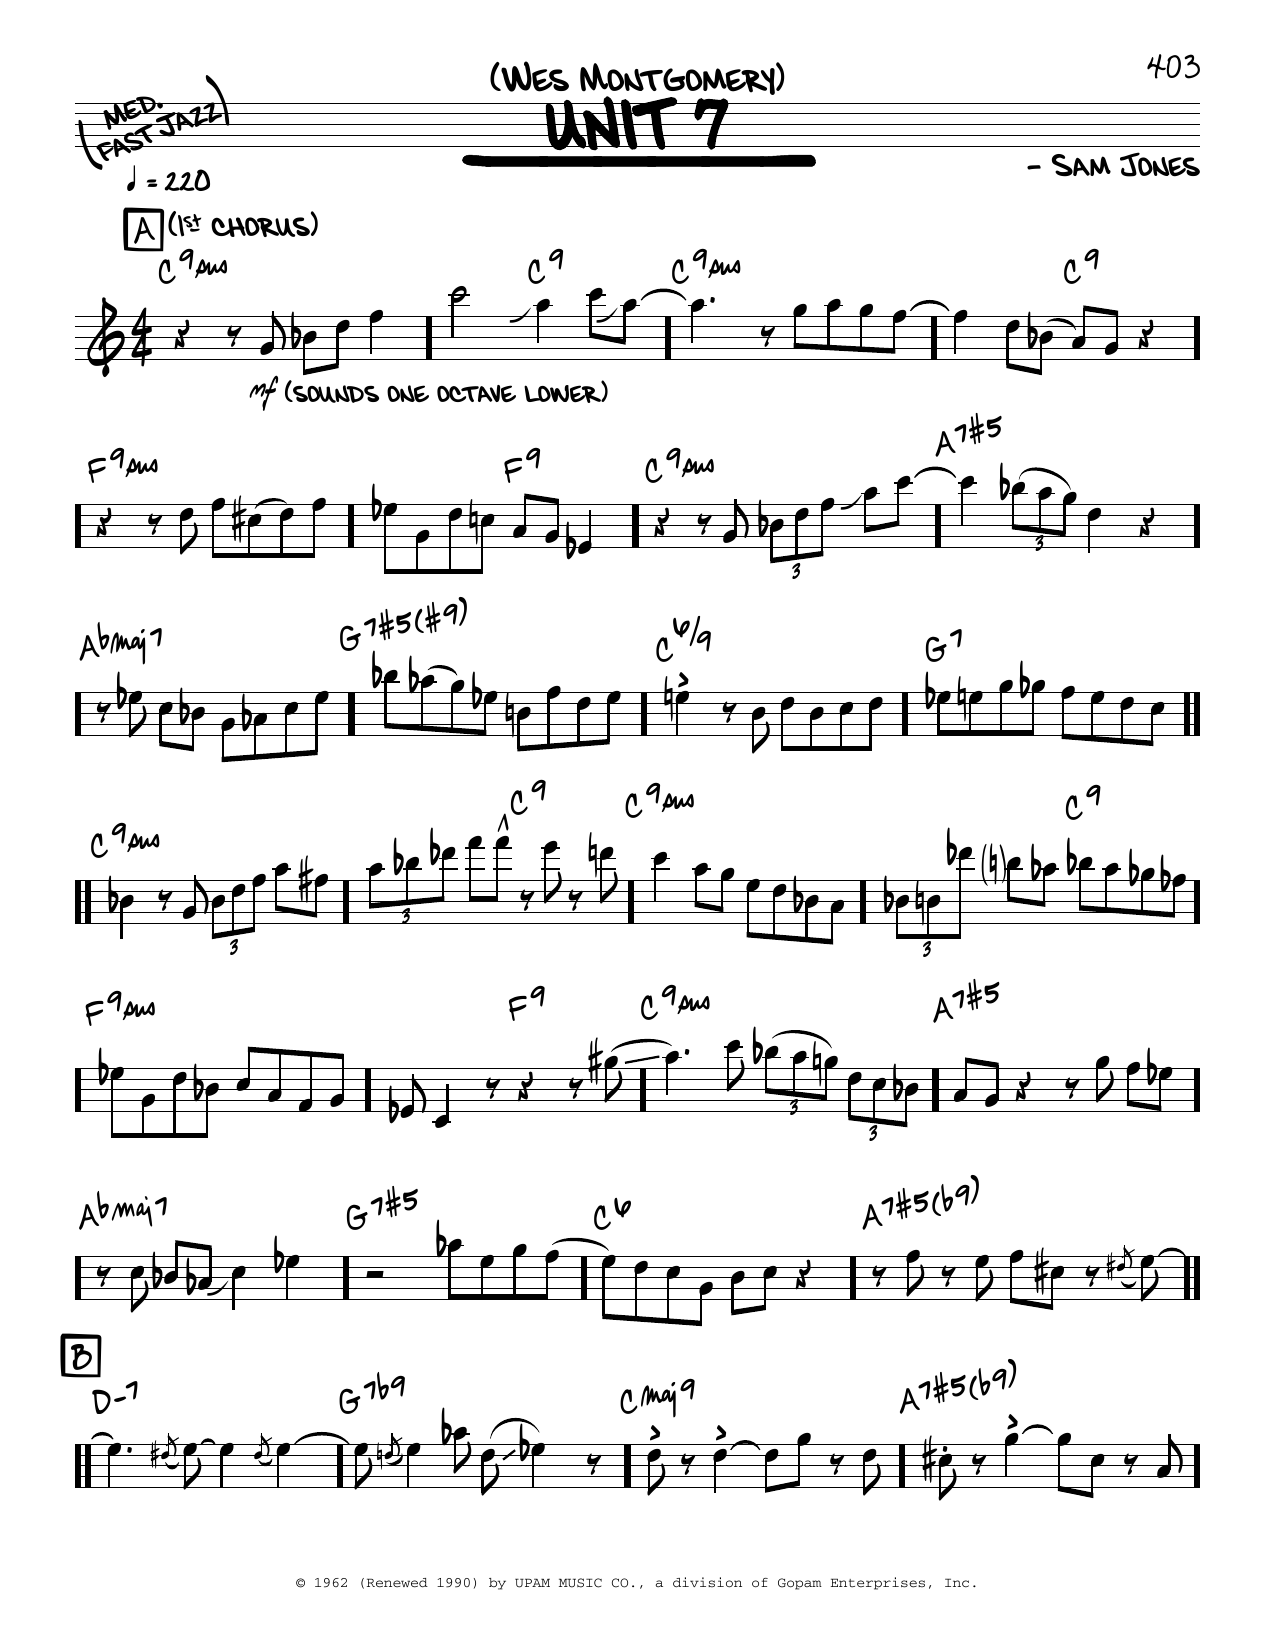 Download Wes Montgomery Unit 7 (solo only) Sheet Music